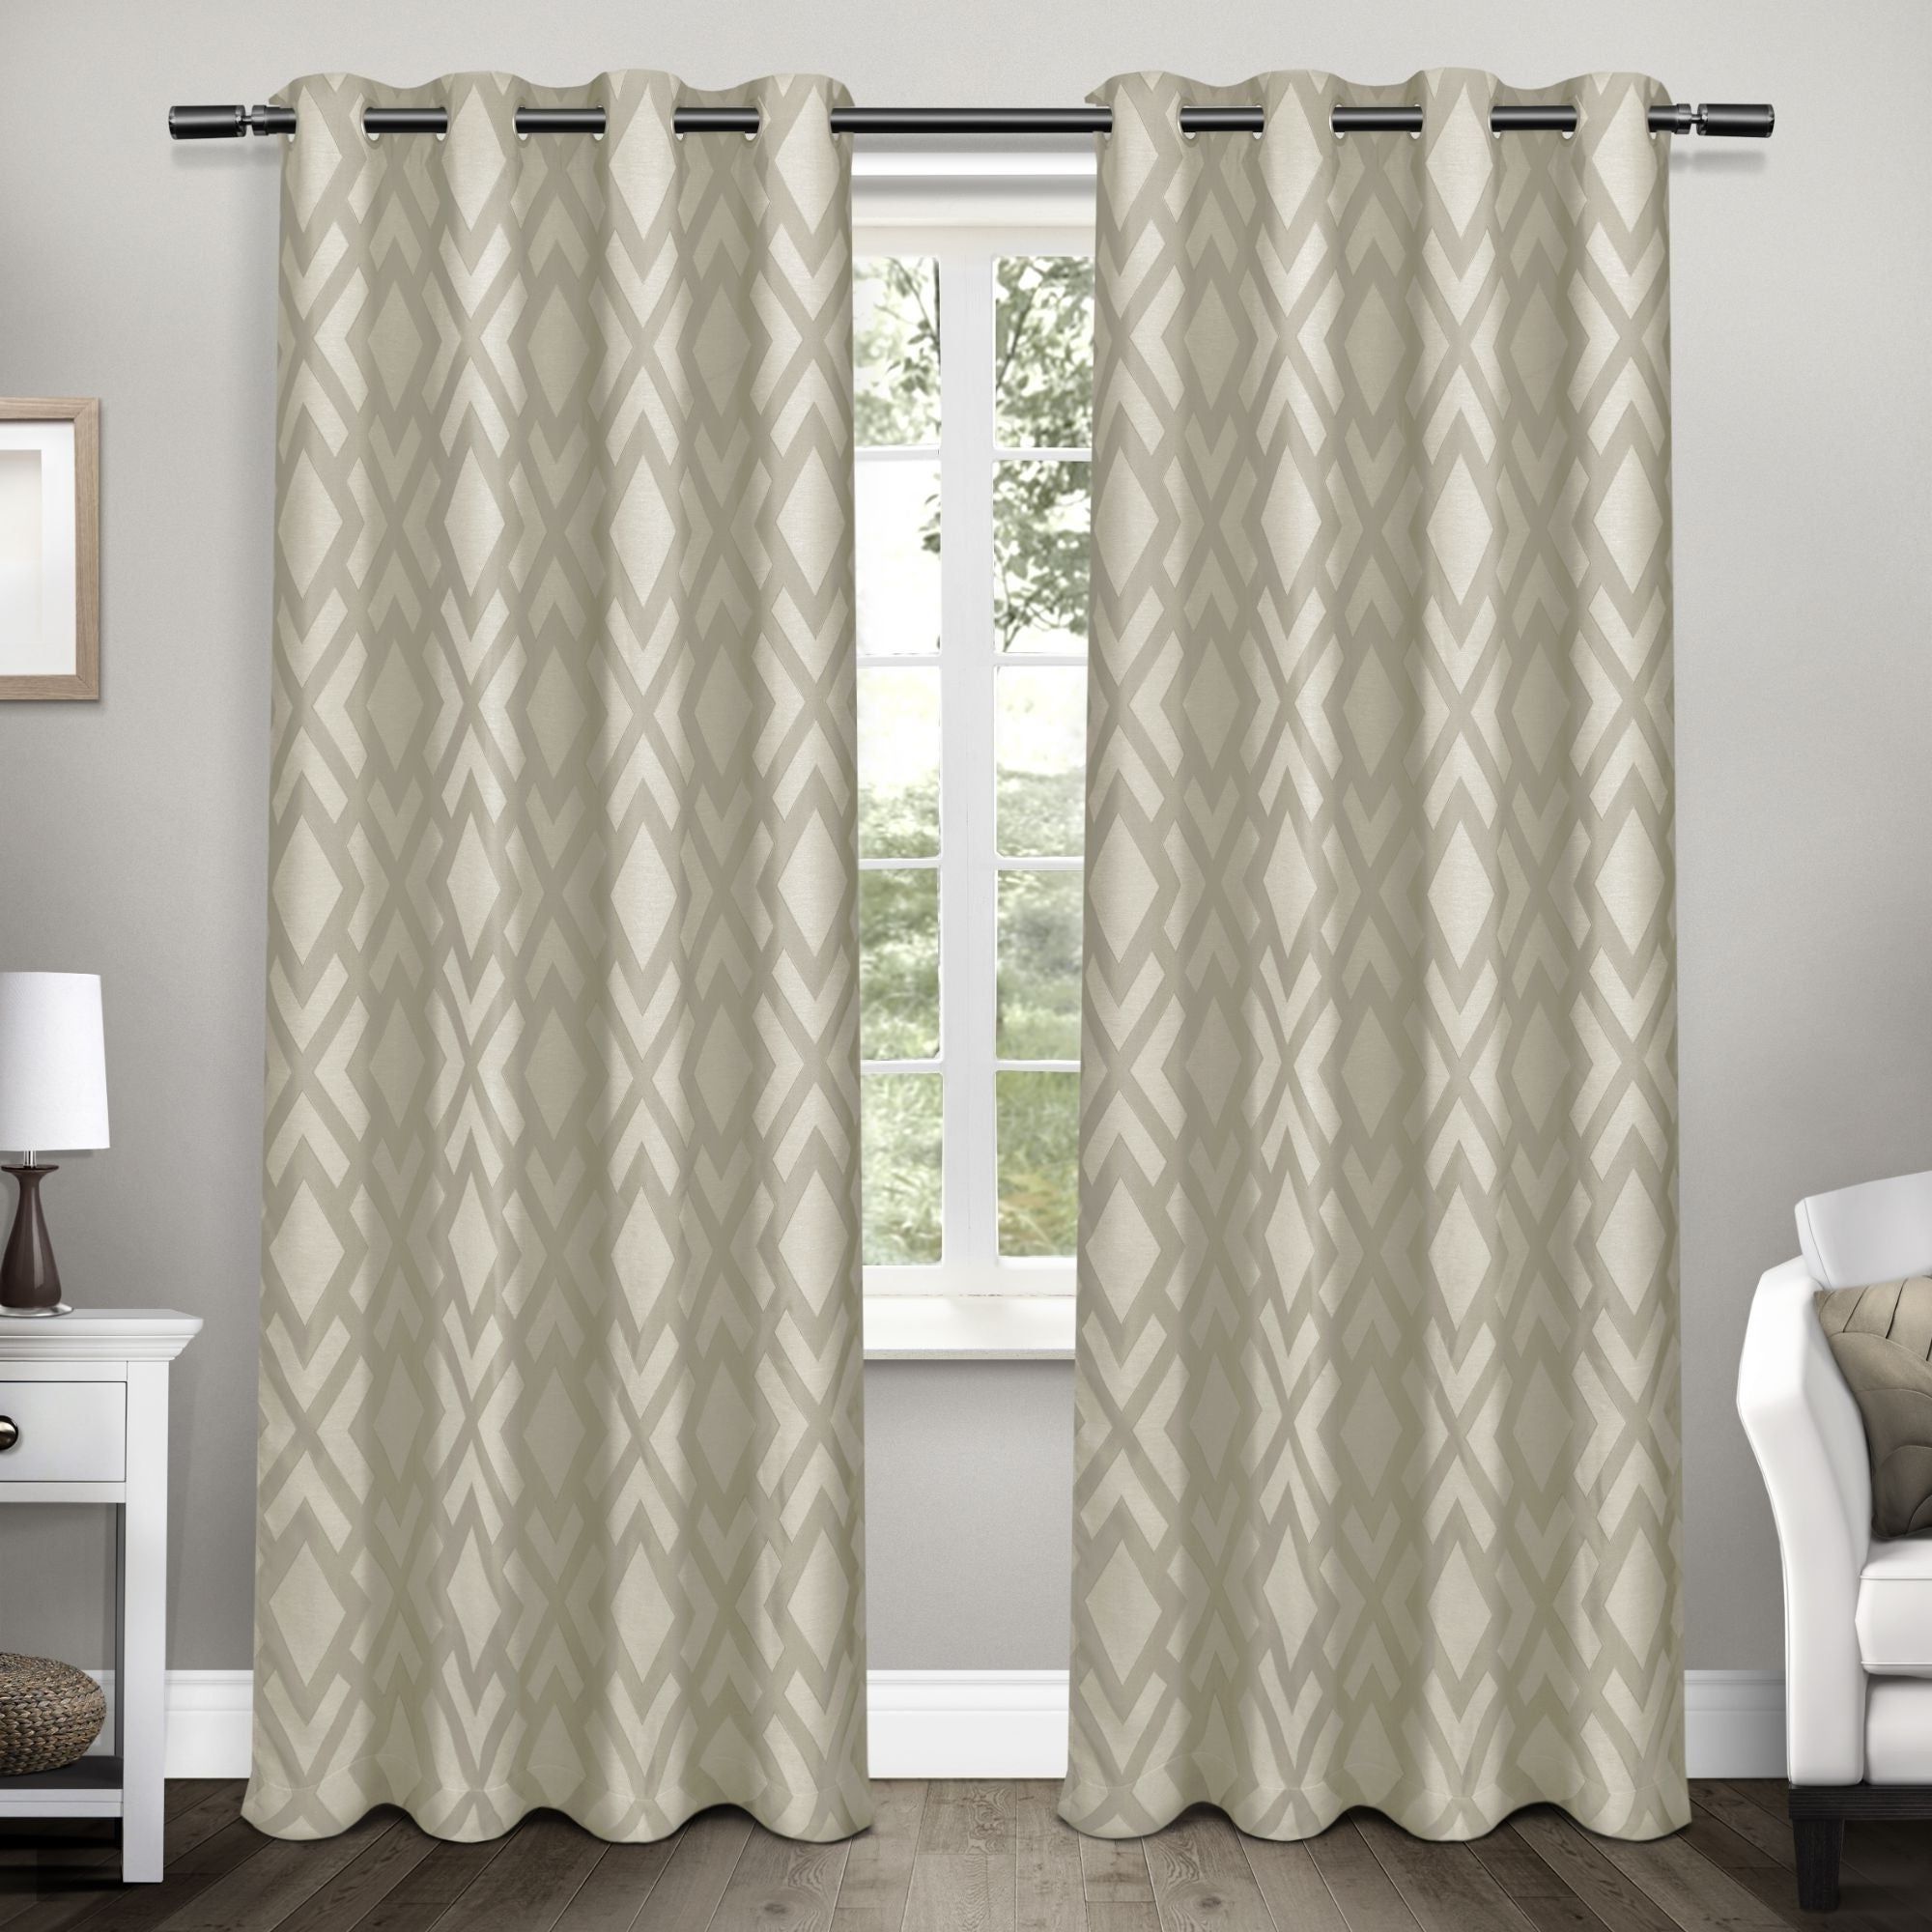 Most Popular Thermal Woven Blackout Grommet Top Curtain Panel Pairs Intended For Ati Home Easton Thermal Woven Blackout Grommet Top Curtain Panel Pair (View 16 of 20)